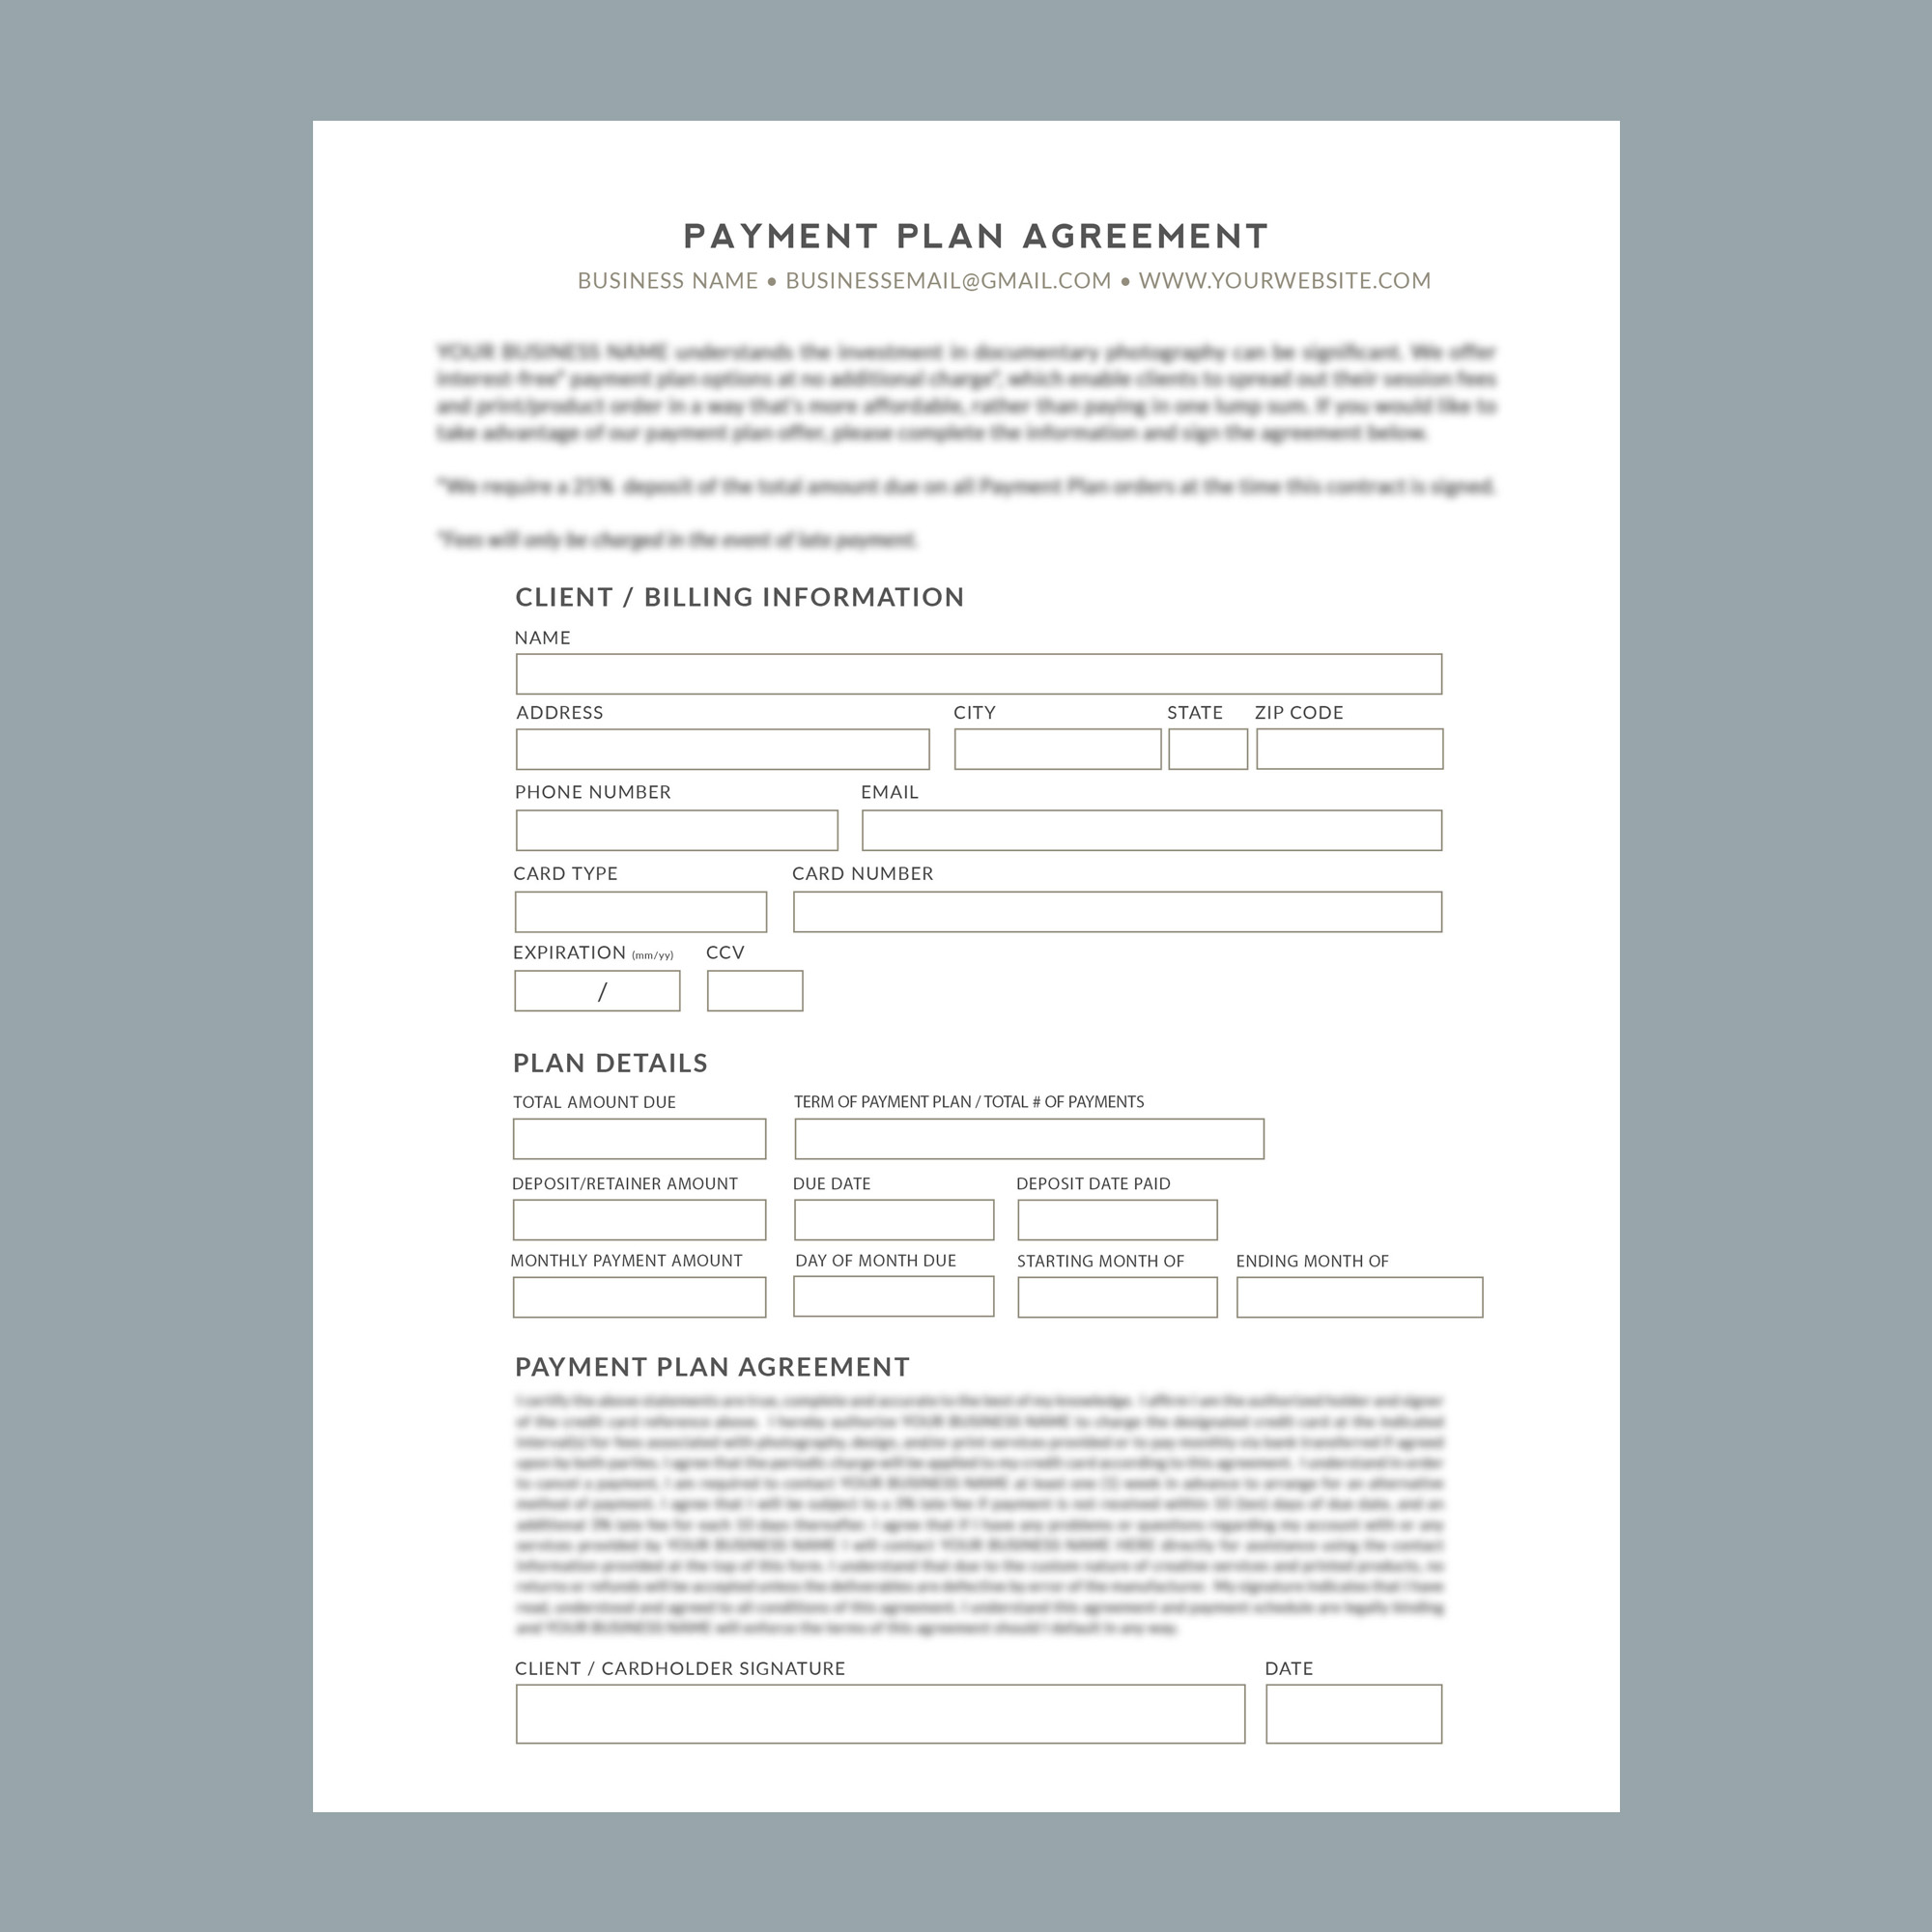 Template For Payment Agreement from images.squarespace-cdn.com